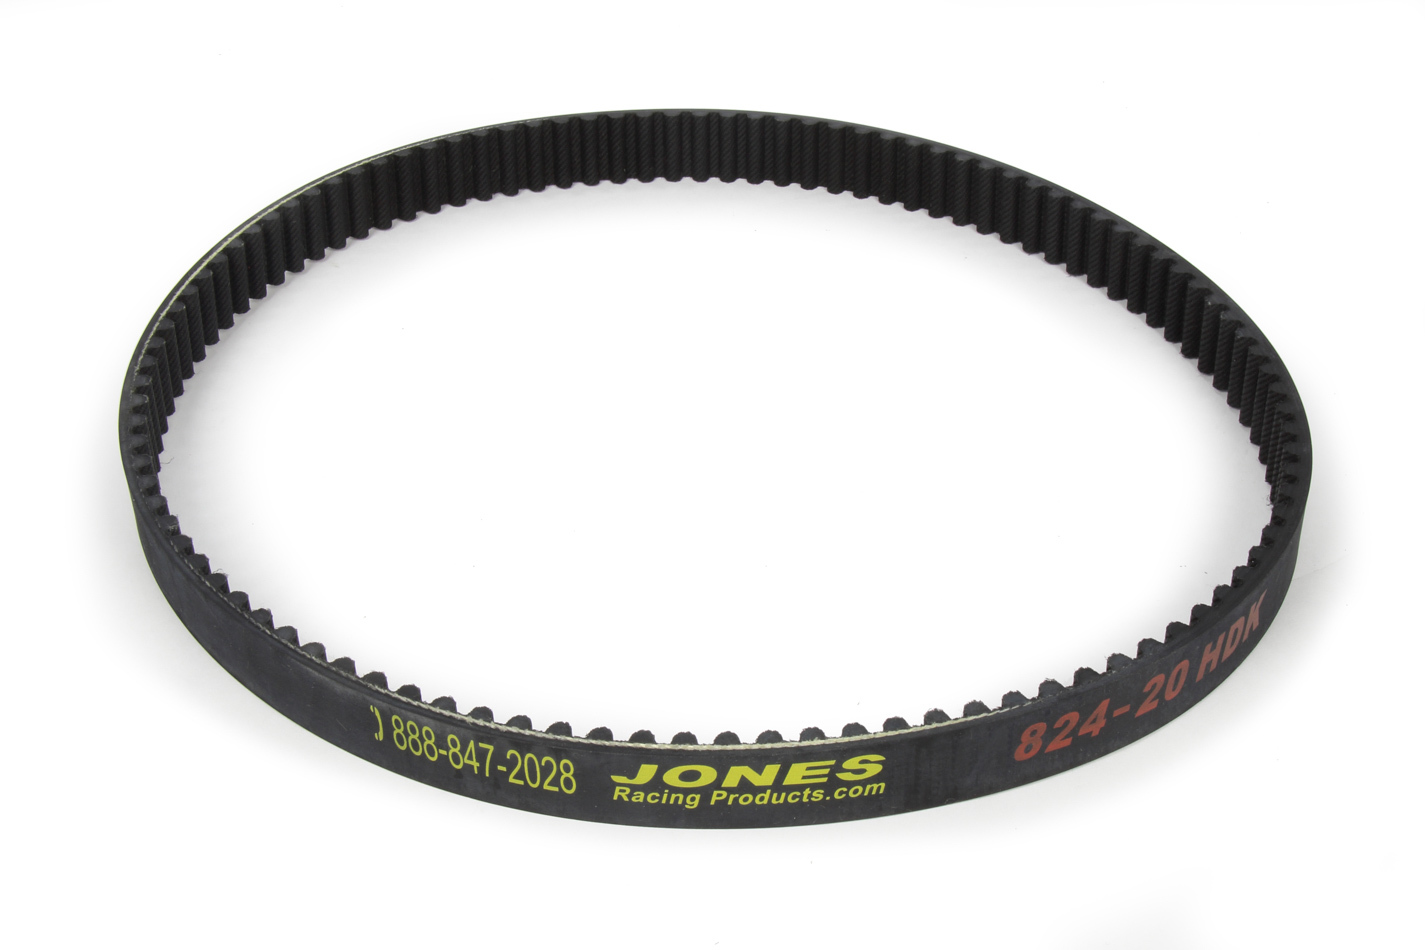 Jones Racing Products 824-20HD HTD Drive Belt, 32.440 in Long, 20 mm Wide, 8 mm Pitch, Each